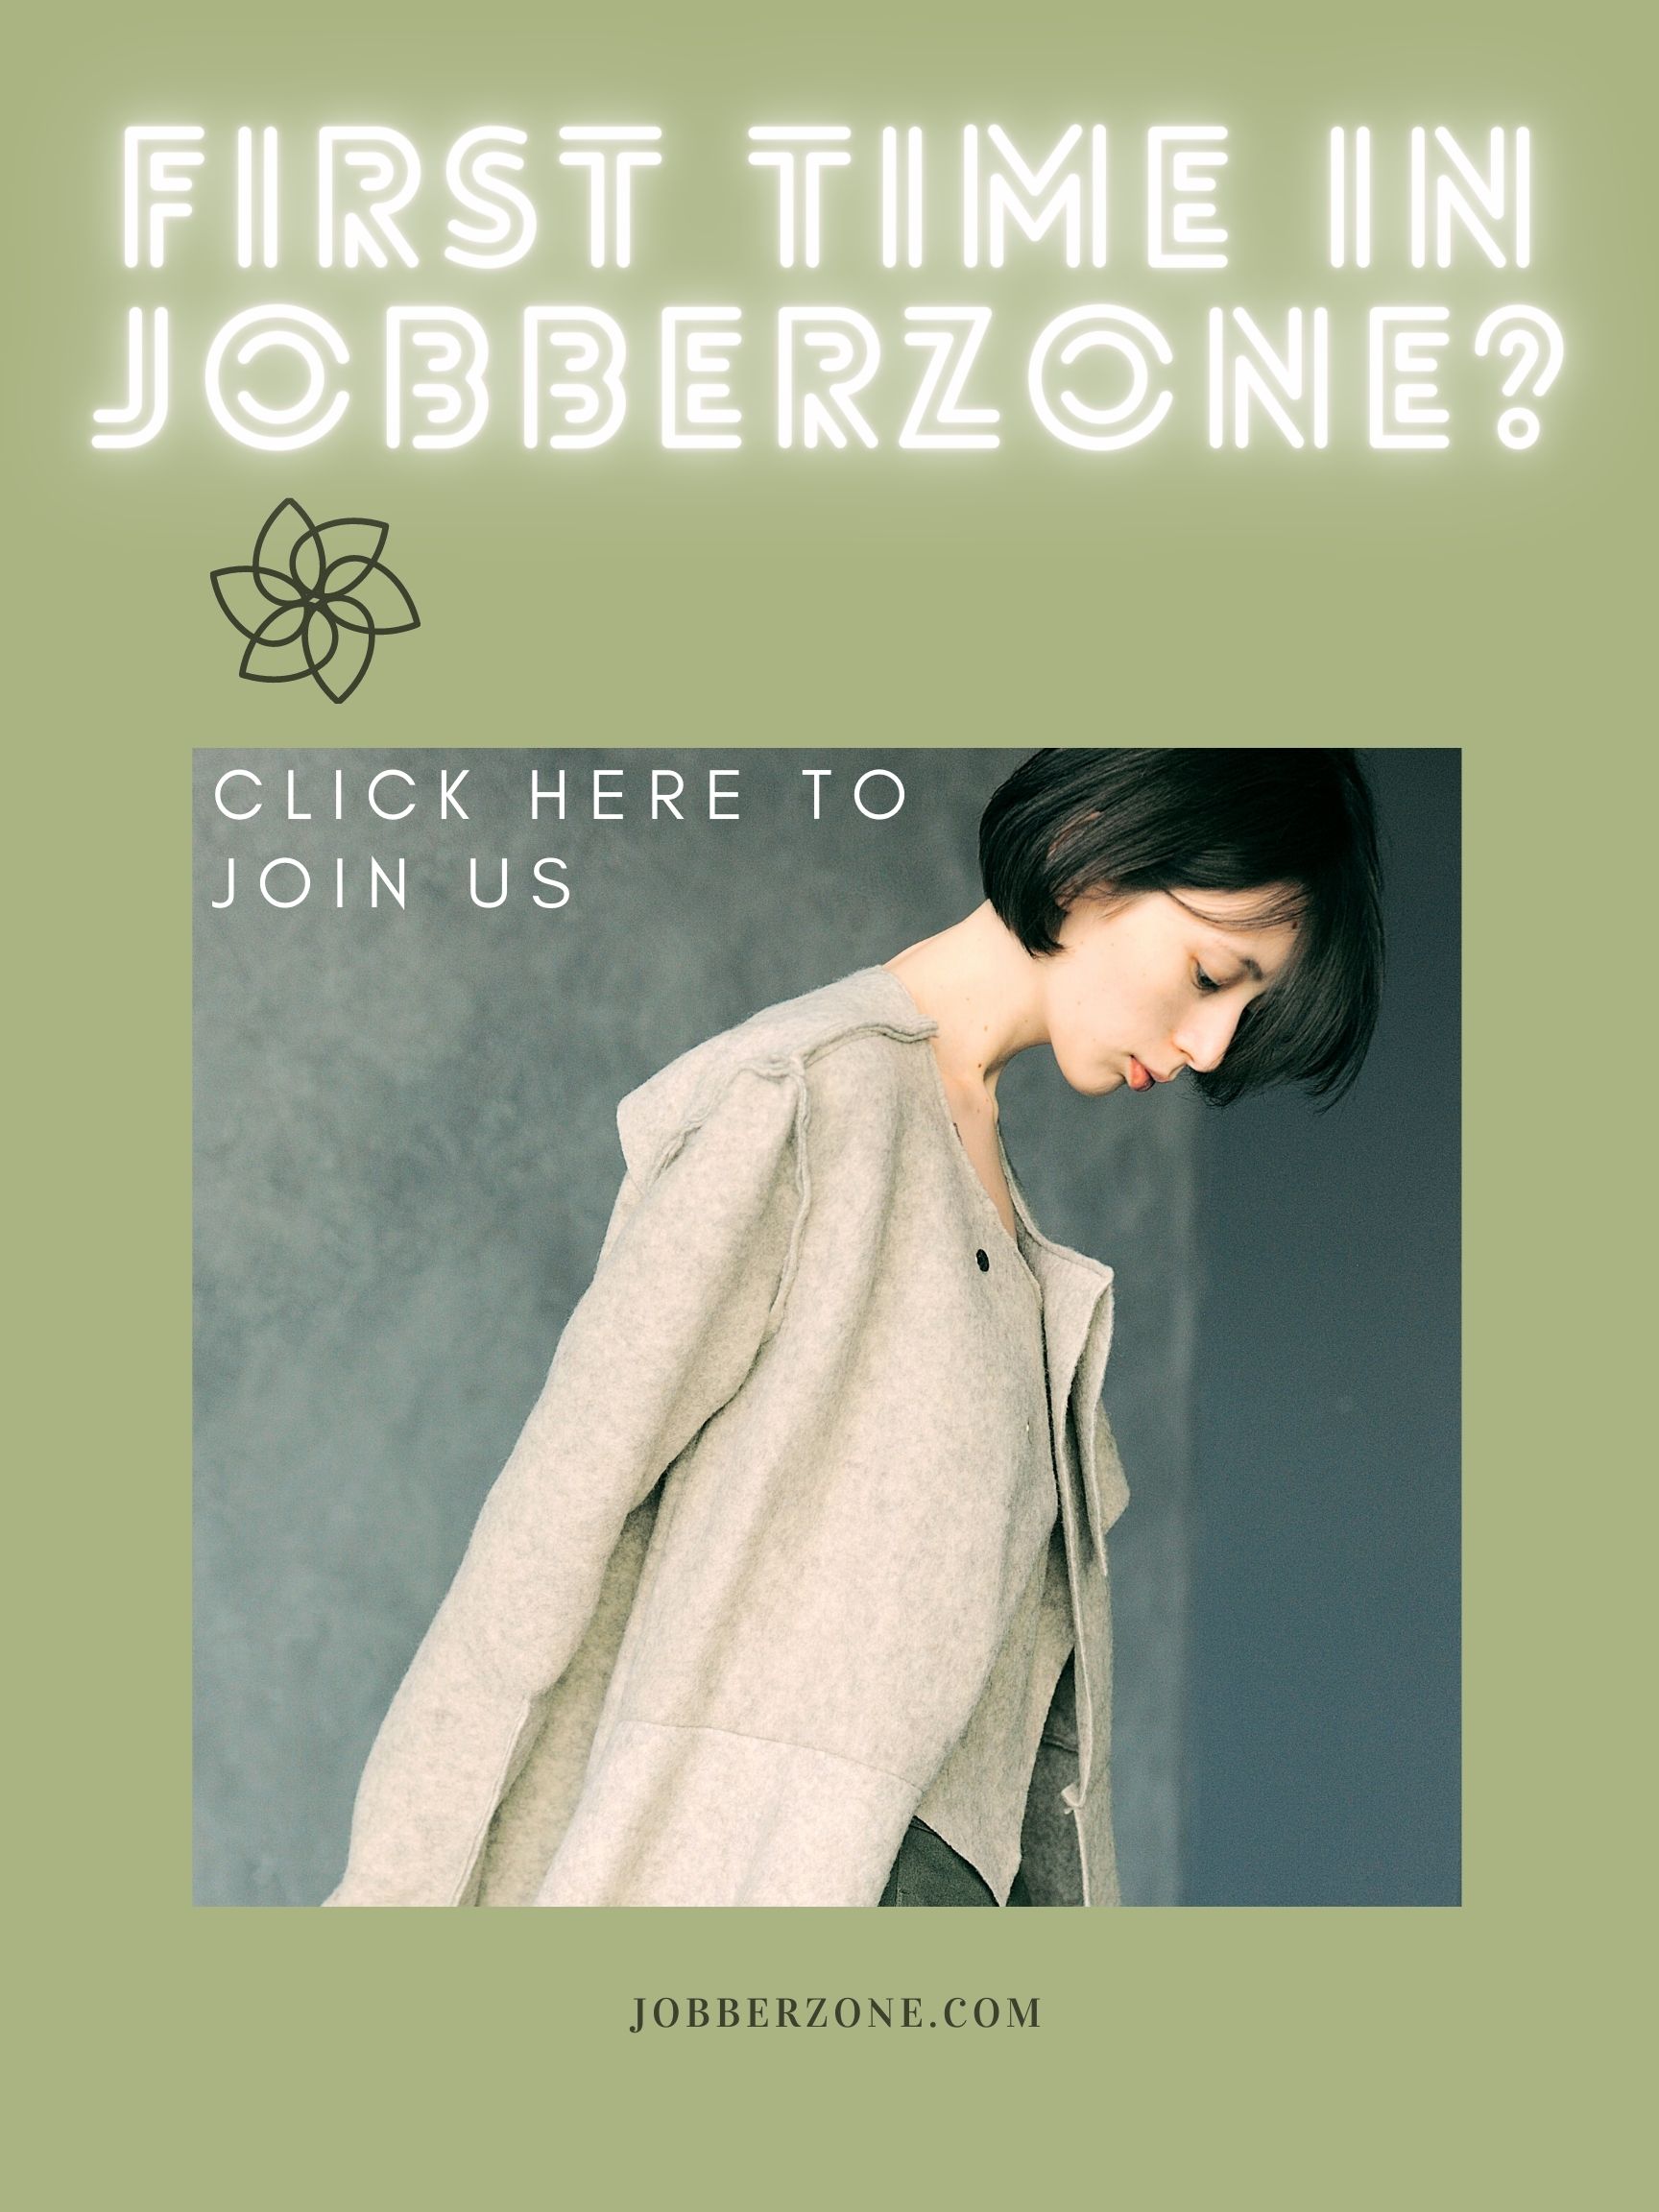 First time in jobberzone Be a part of us!.jpg